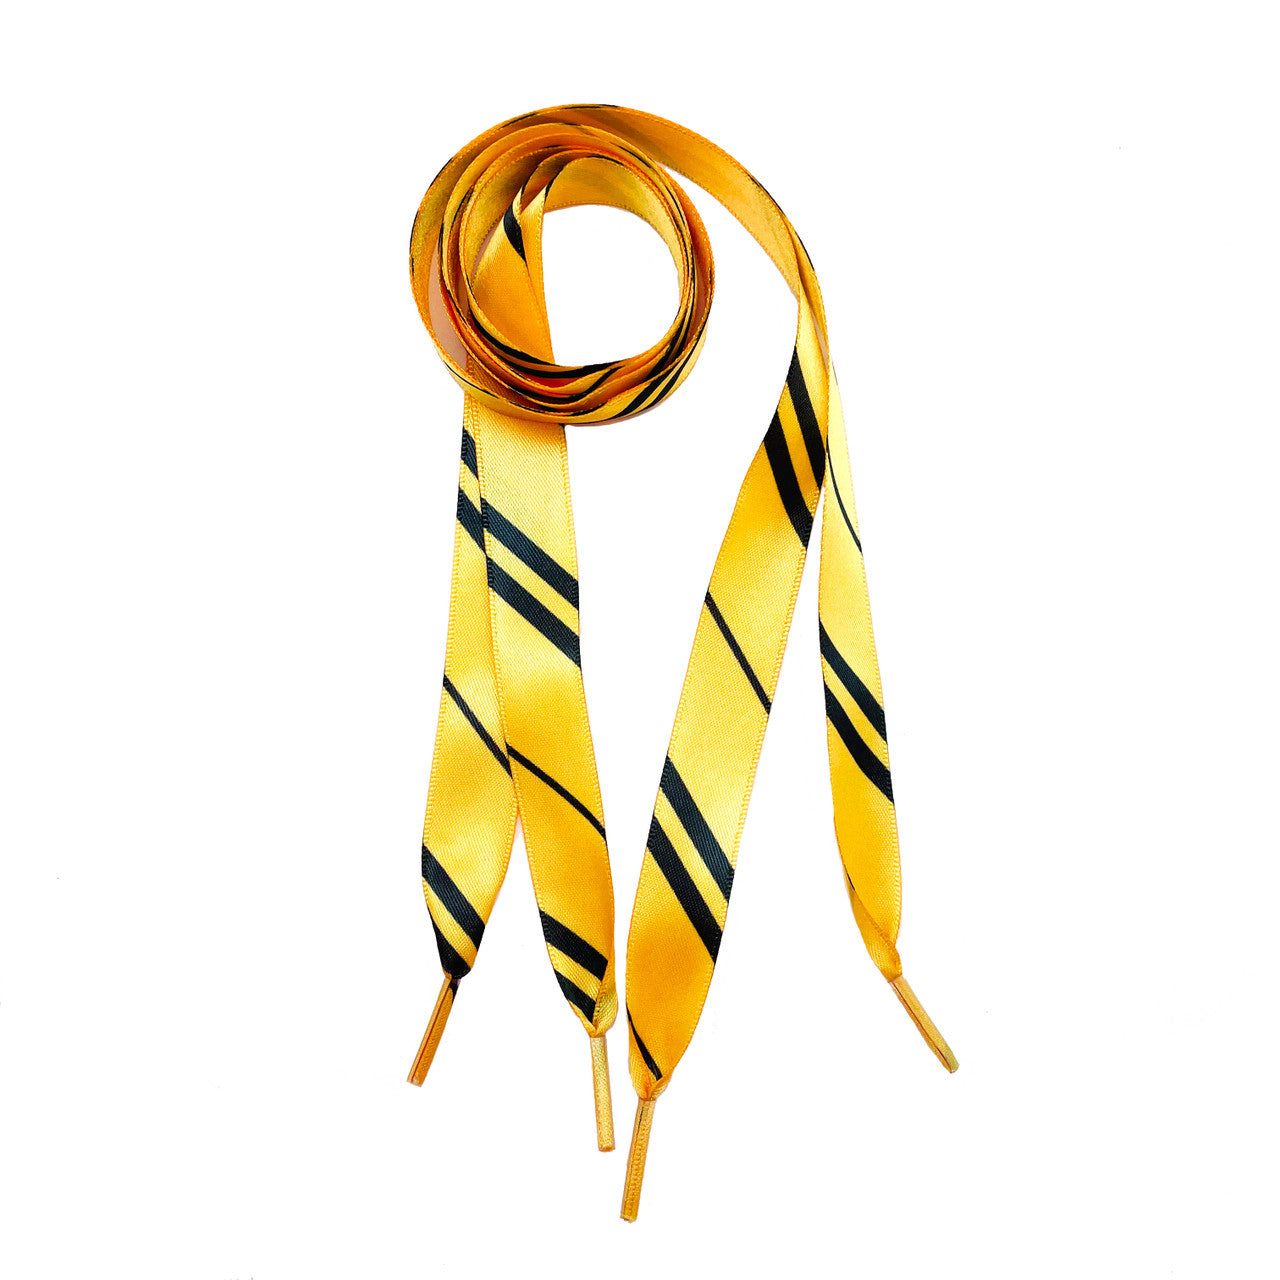 Satin Shoelaces yellow and black stripe ideal for hip hop, dance team, sneaker junkie, cheerleading, wedding, in 36" and 44" lengths